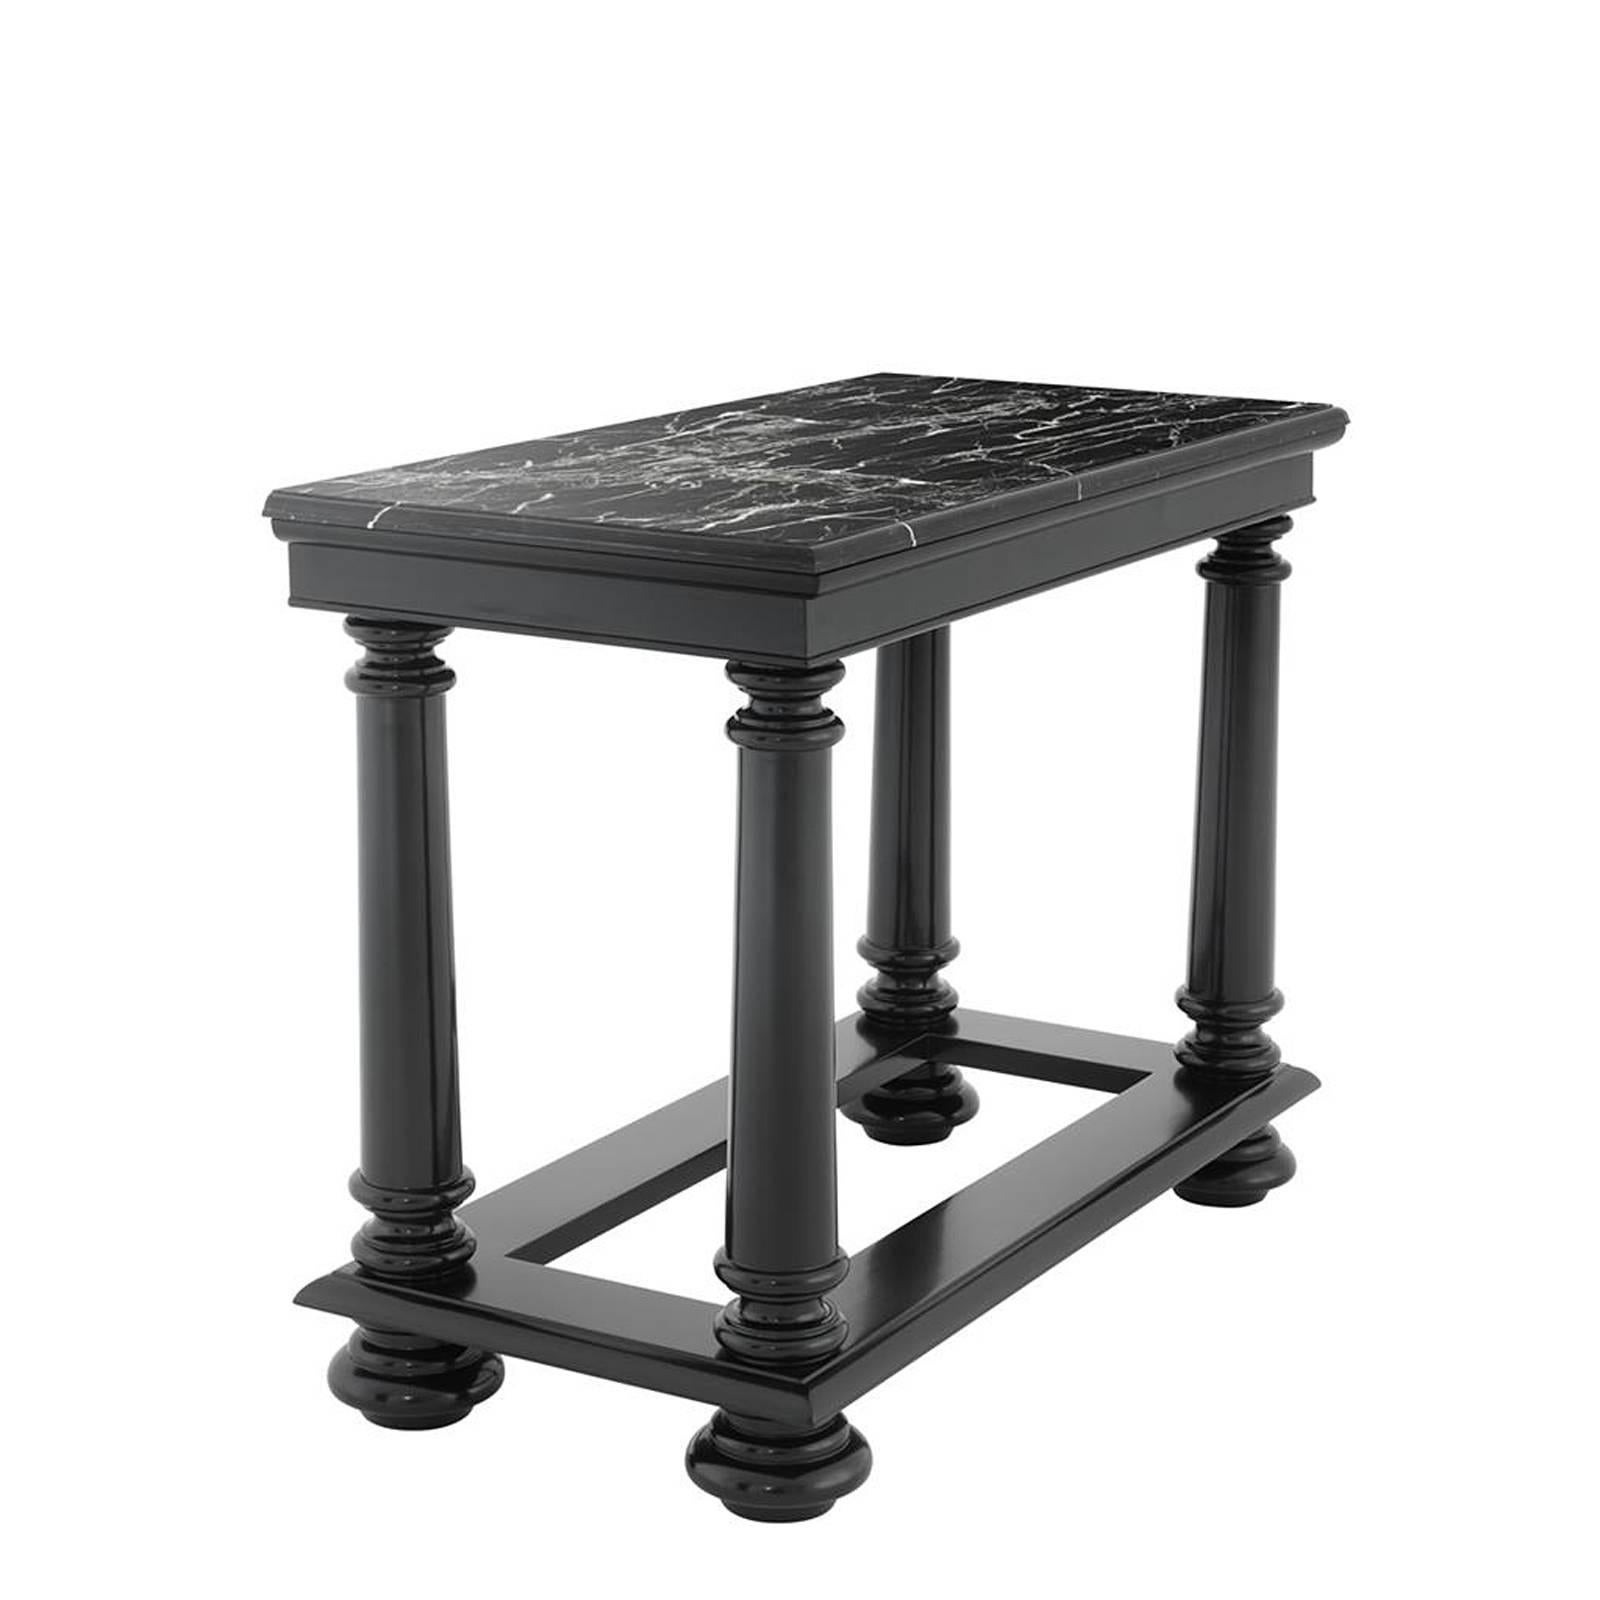 Console Table Harth Medium with structure in solid mahogany
wood. With black waxed finish. With black marble top.
Also available in Console Table Harth Large and Console
Table Hart Moon with black marble top.
